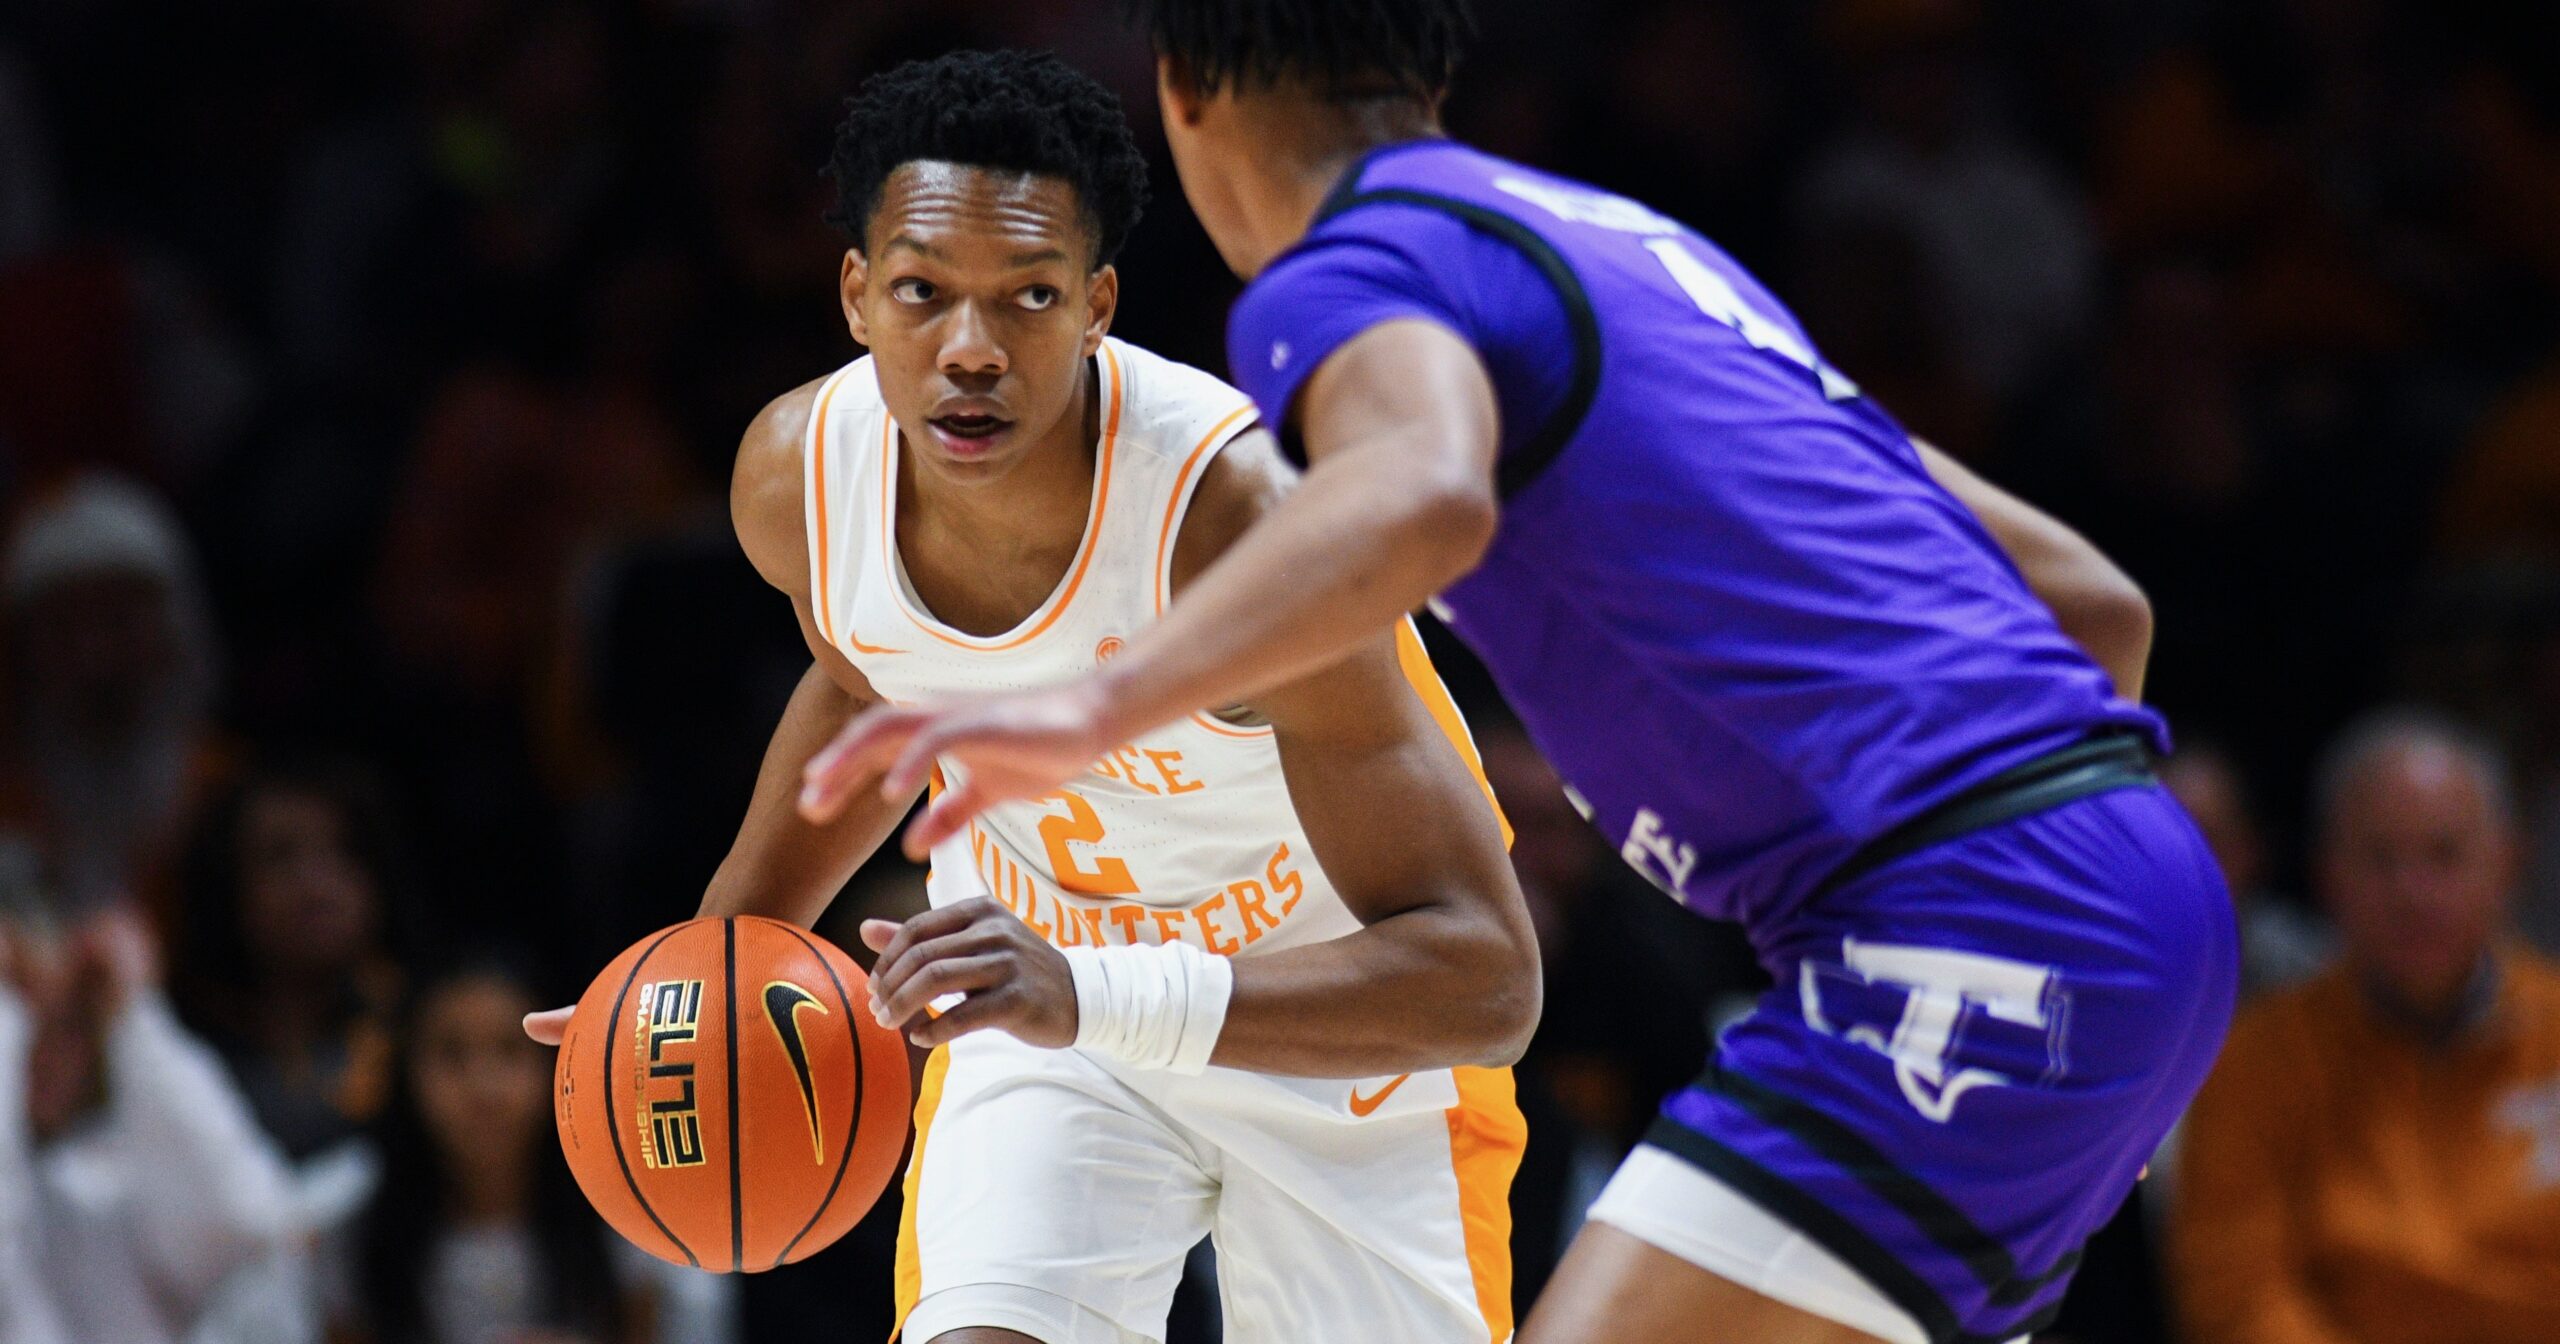 No. 8 Tennessee slowly gets past Tarleton State, 65-46